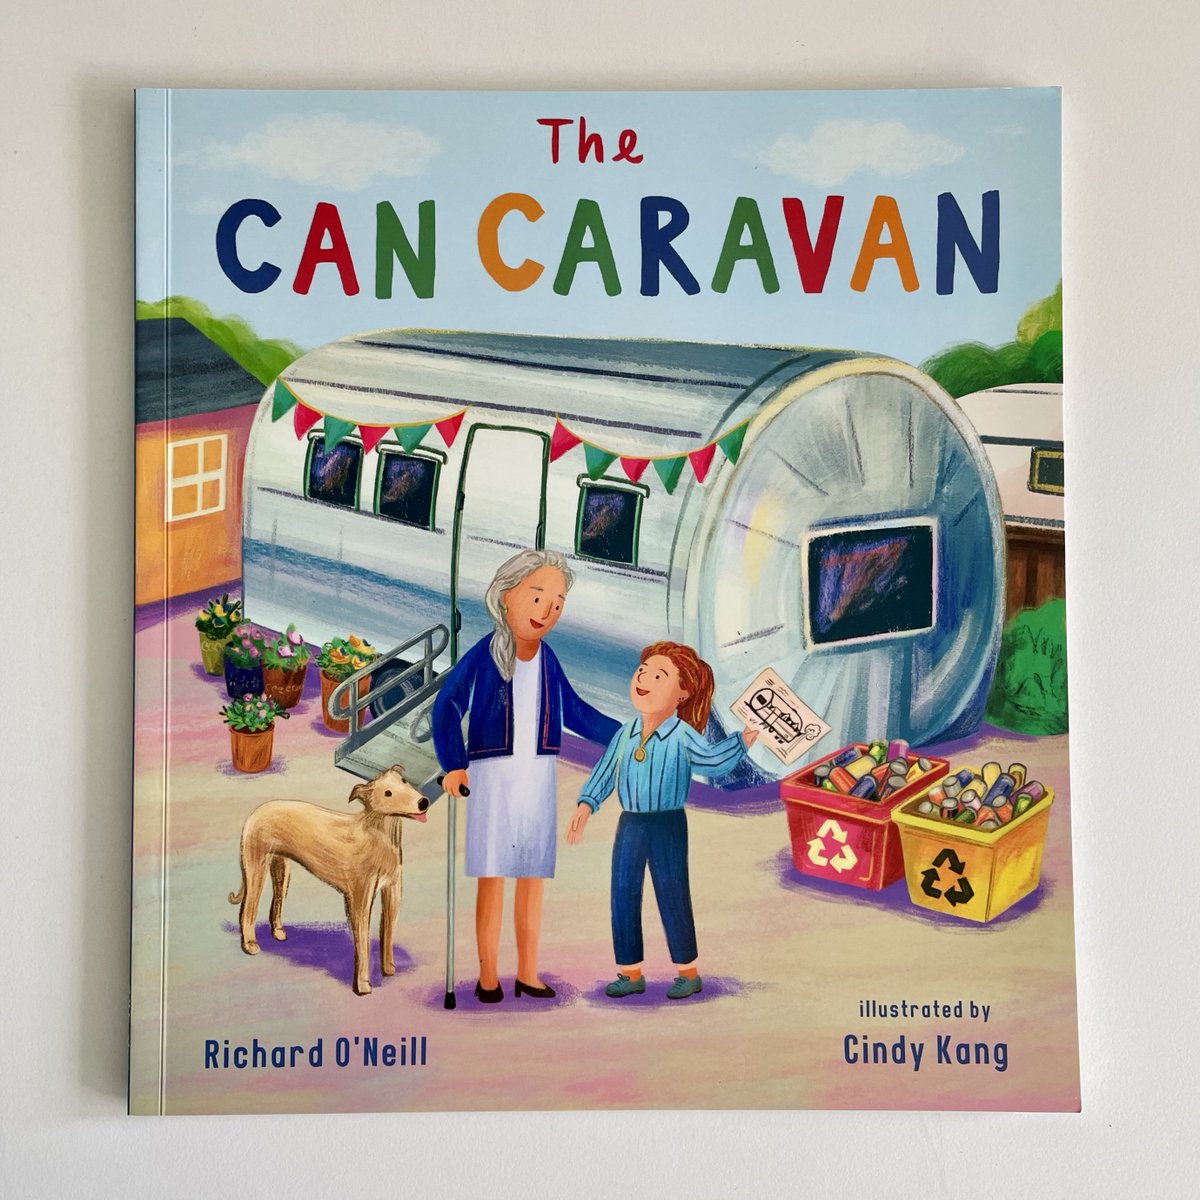 'A story set in rare context of a Traveller site which meaningfully extols benefits of recycling while celebrating Traveller heritage and culture' @littlerebsprize

Isn't this great! THE CAN CARAVAN @therroneill @cindysykang on #LittleRebelsAward longlist! childs-play.com